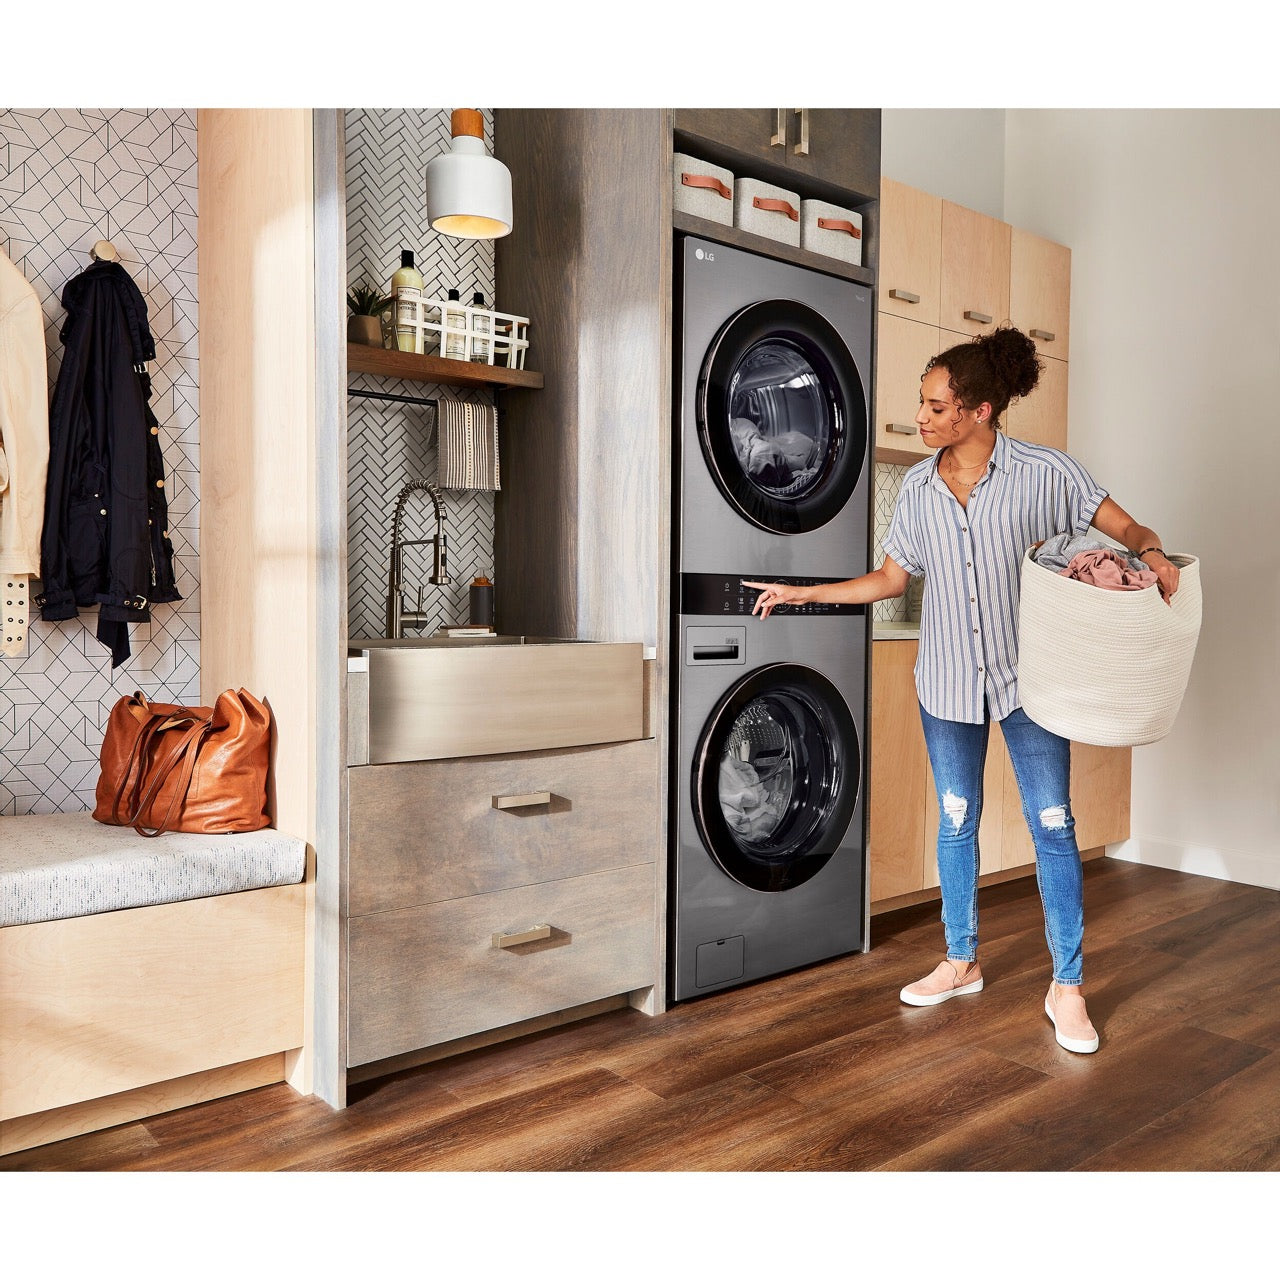 LG WashTower Single Front Load Unit with Center Control, 4.5-Cu. Ft. Washer and 7.4-Cu. Ft. Electric Dryer in Graphite (WKE100HVA)